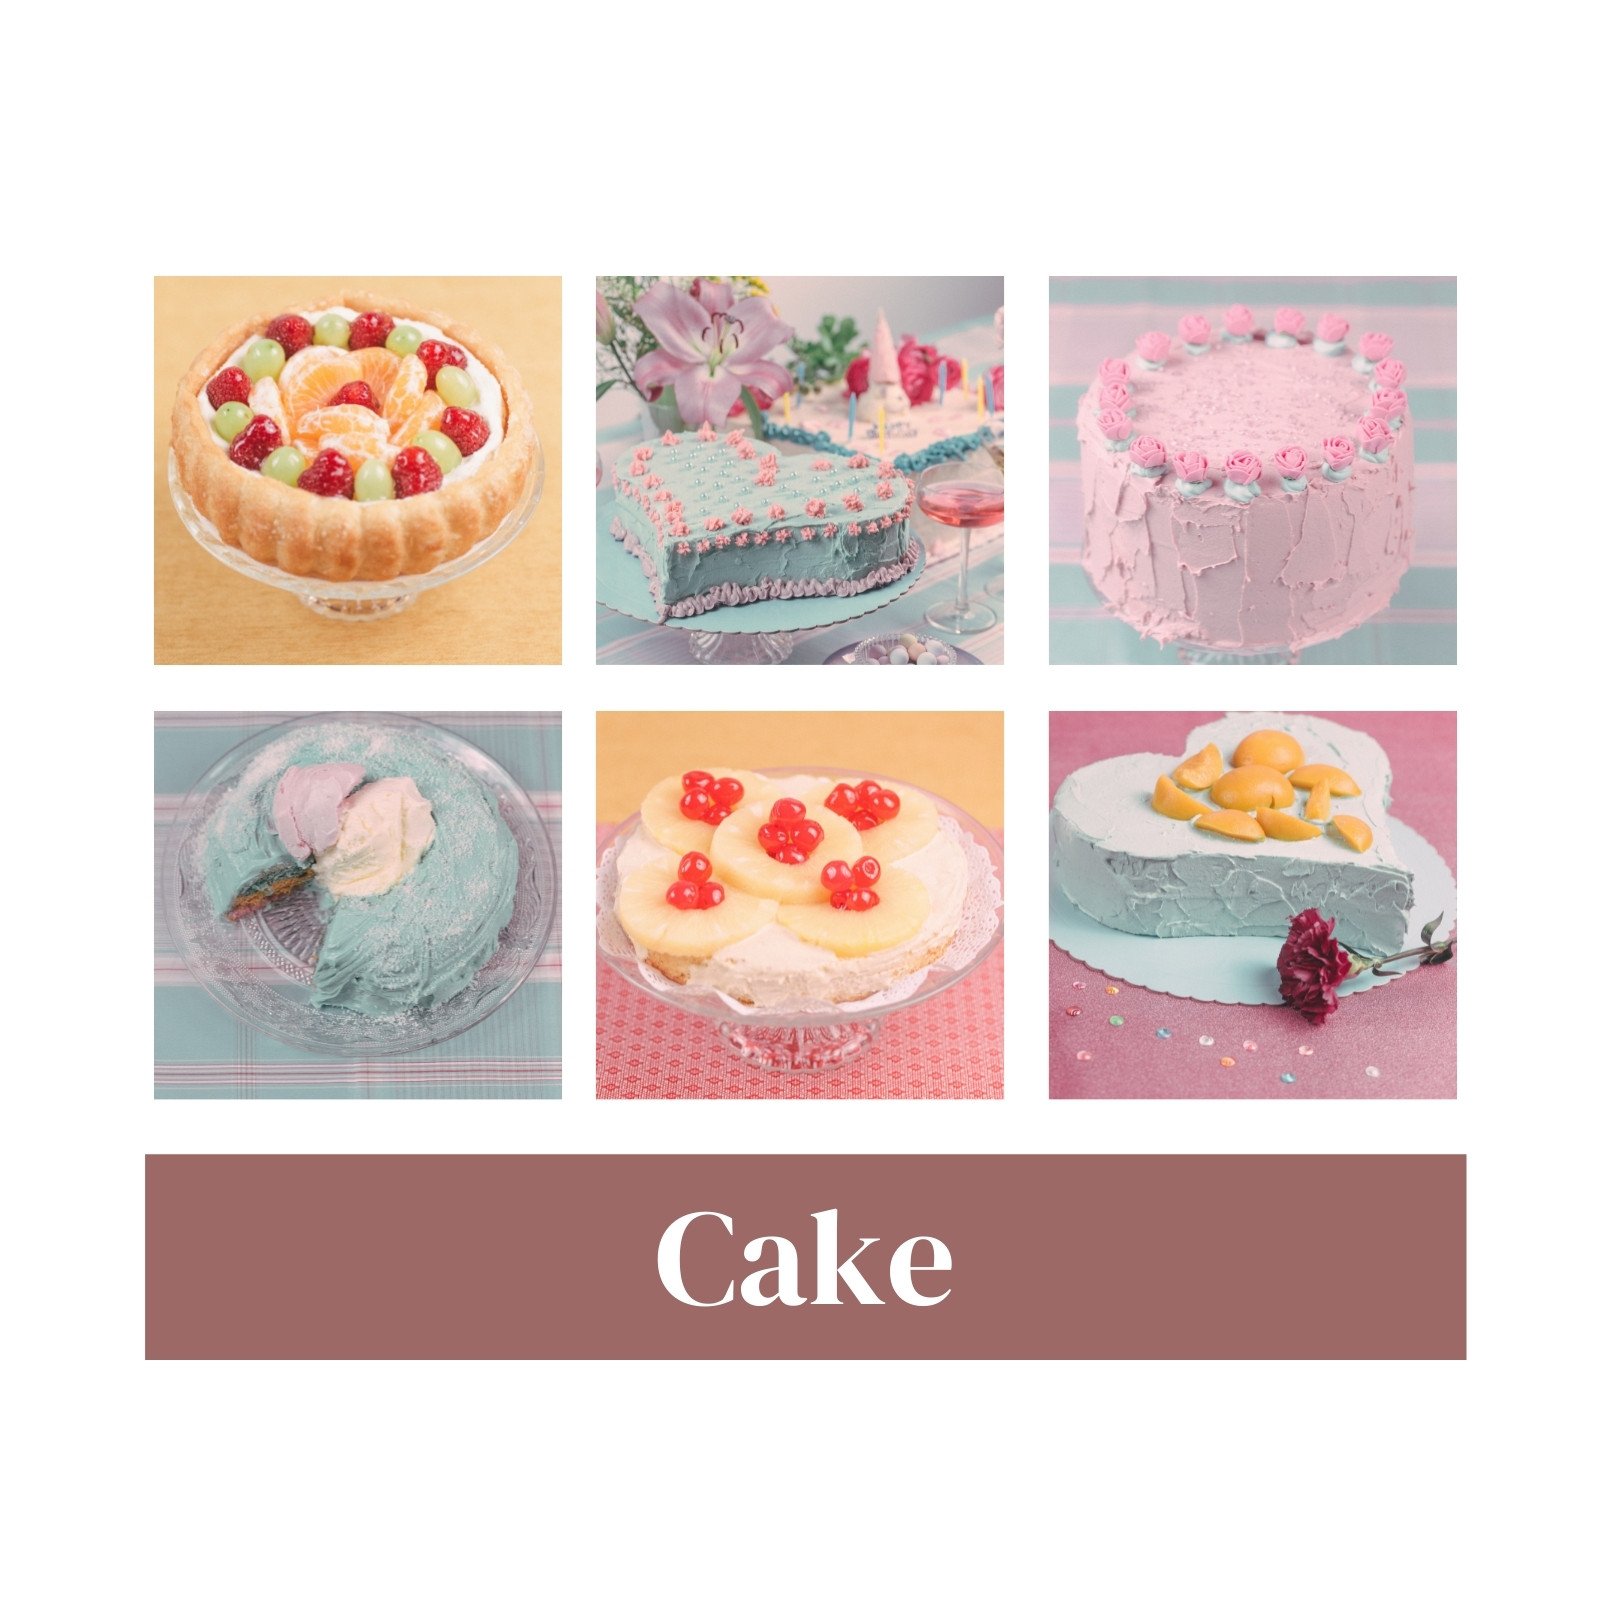 Update 69+ cakes and pastries background best - awesomeenglish.edu.vn